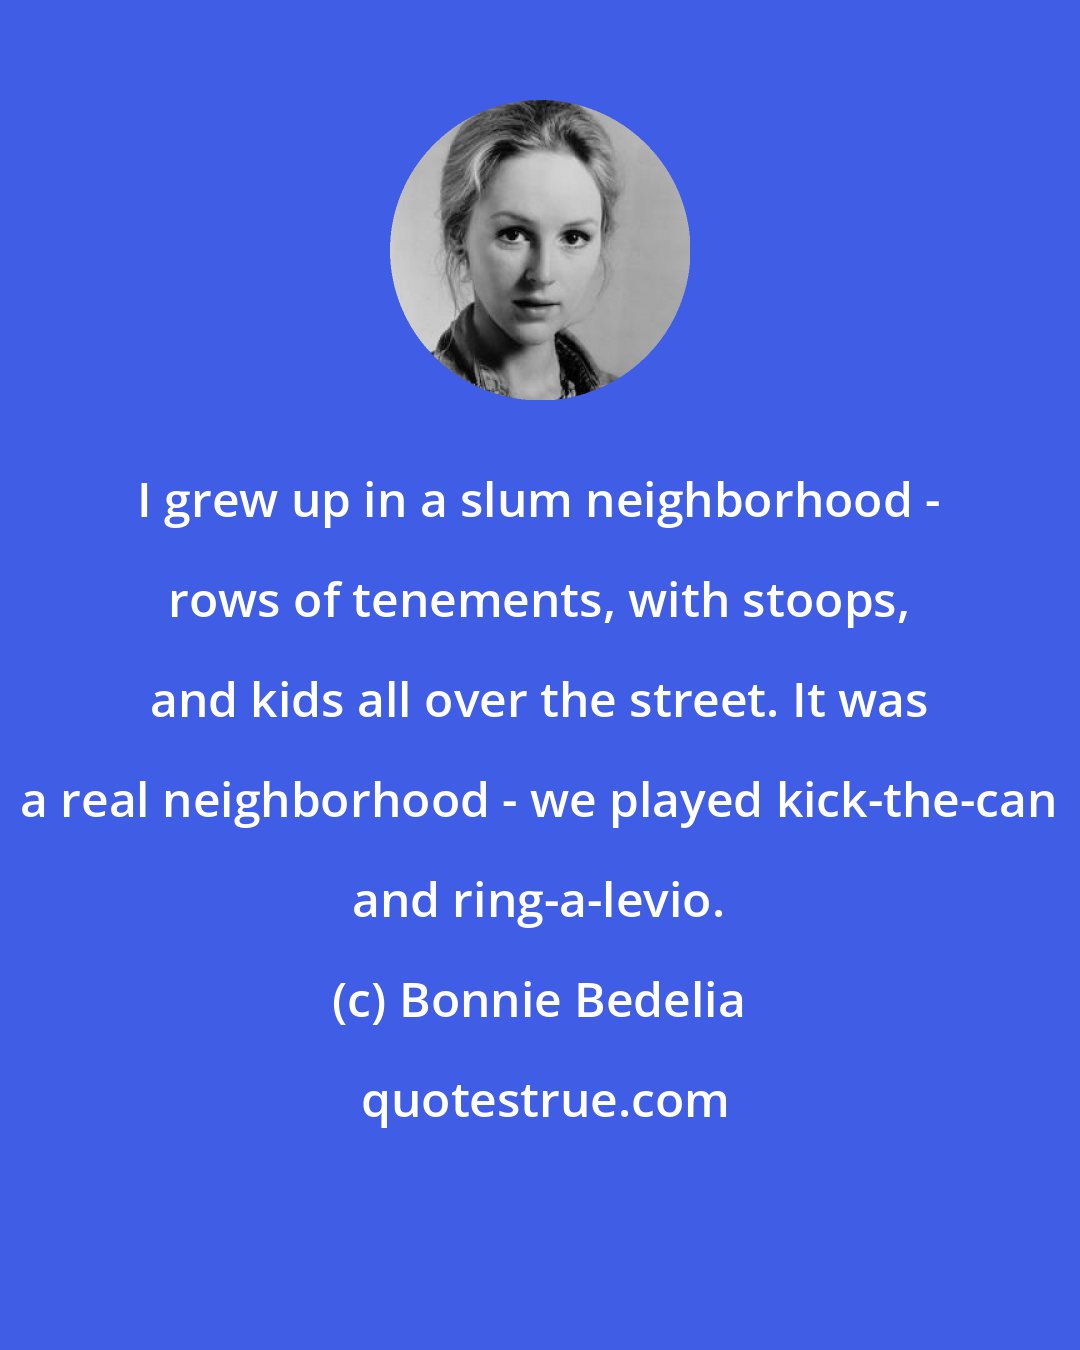 Bonnie Bedelia: I grew up in a slum neighborhood - rows of tenements, with stoops, and kids all over the street. It was a real neighborhood - we played kick-the-can and ring-a-levio.